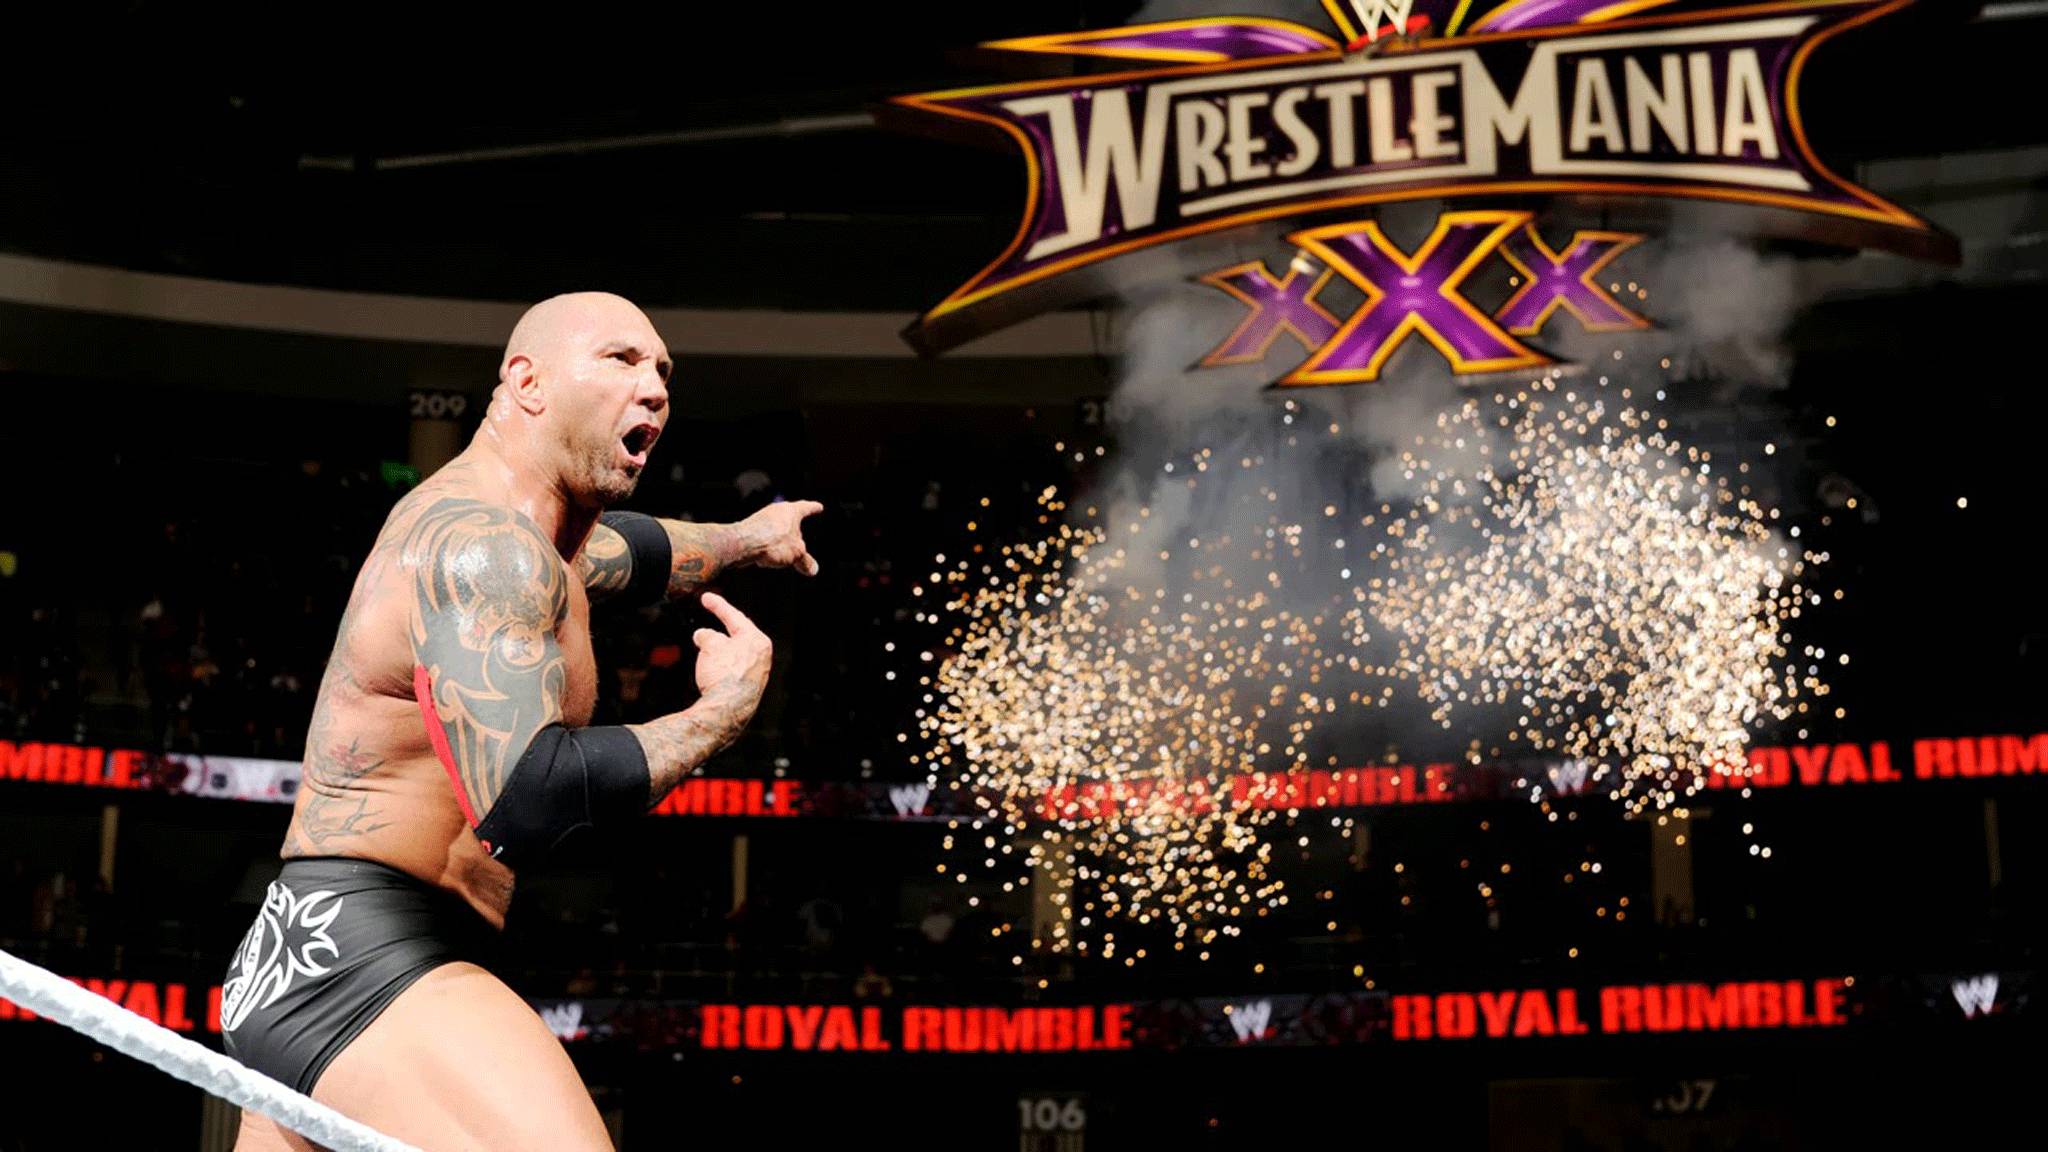 Batista will be at Wrestlemania - will you be tuning in?